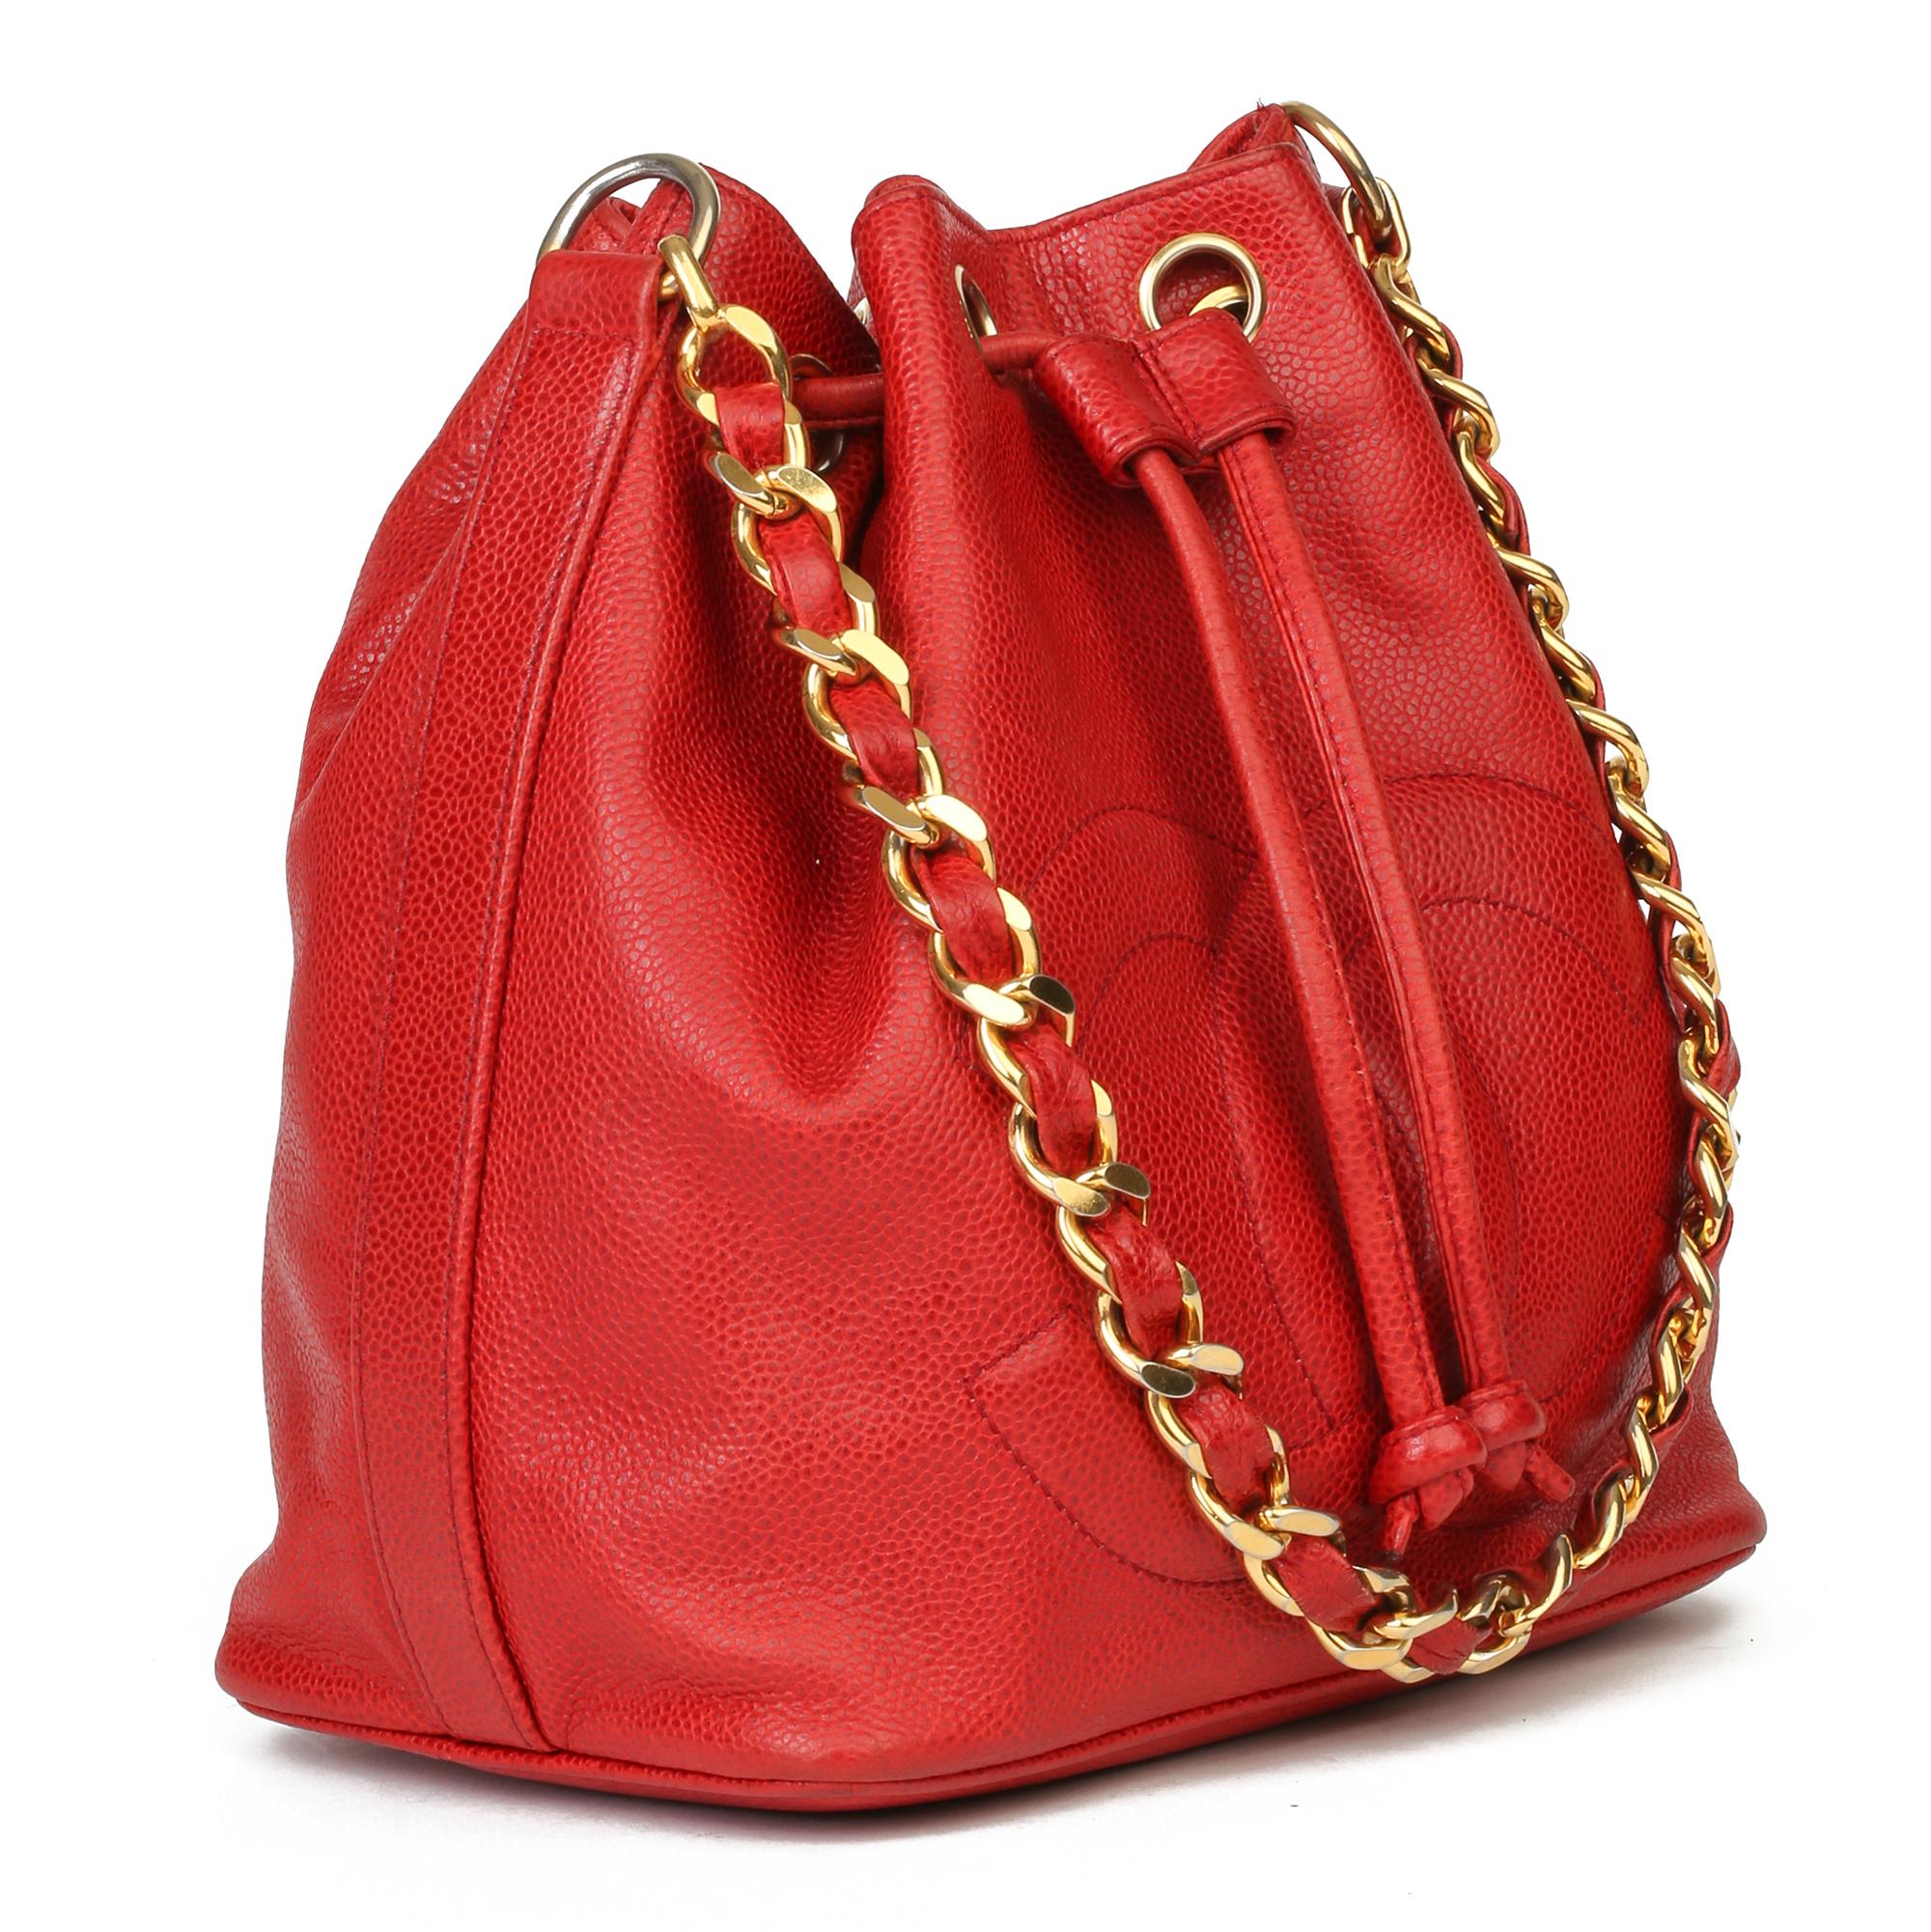 CHANEL
Red Caviar Leather Vintage Timeless Bucket Bag with Pouch

Xupes Reference: HB3935
Serial Number: 1966174
Age (Circa): 1990
Accompanied By: Authenticity Card, Interior Pouch
Authenticity Details: Authenticity Card, Serial Sticker (Made in